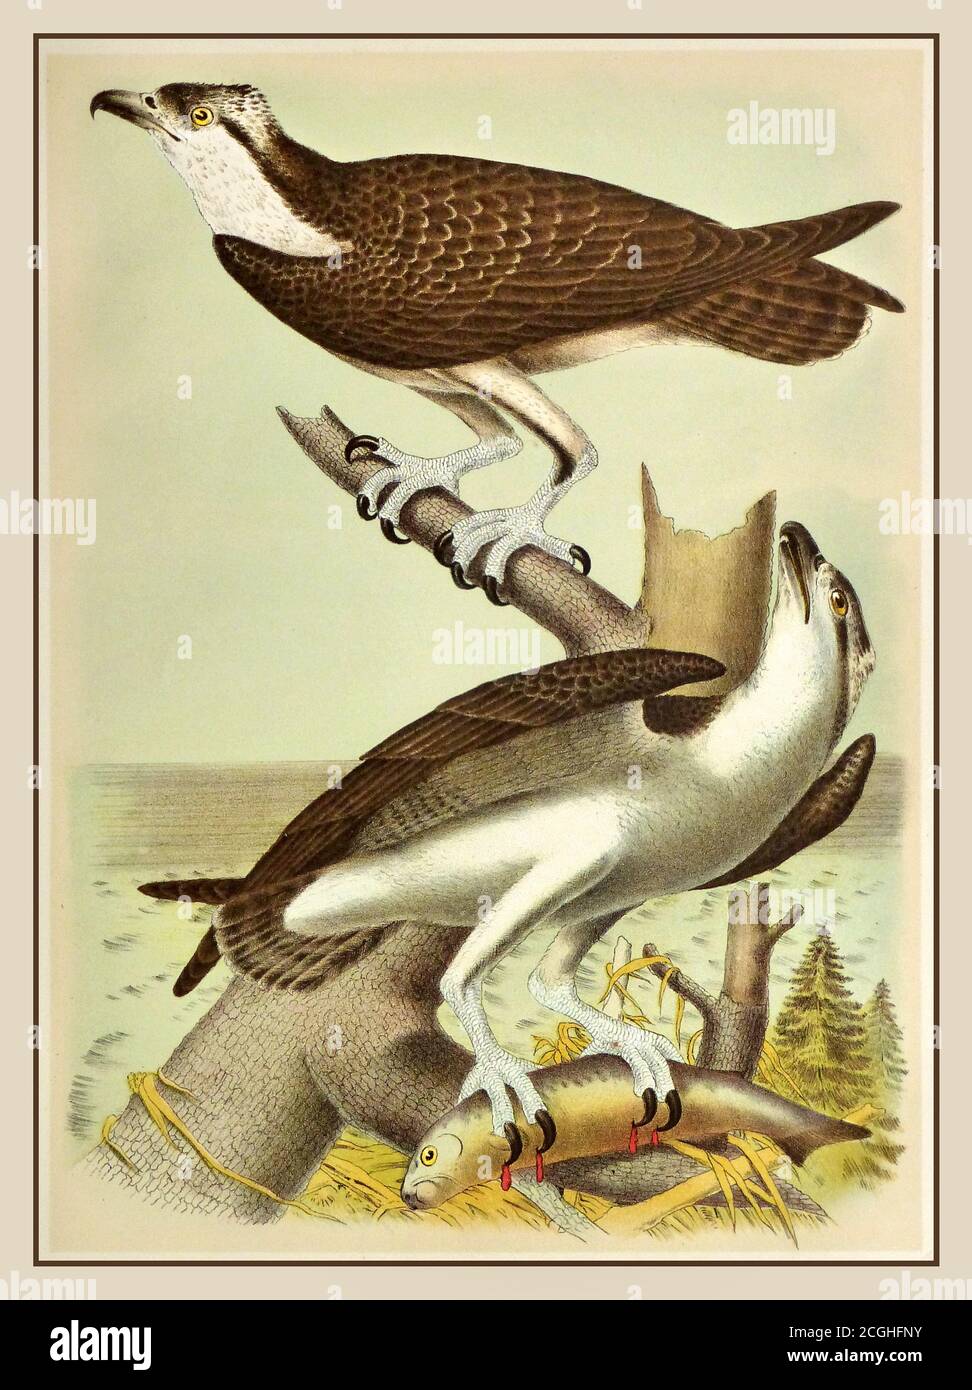 1800’s Vintage color stone lithograph of two Osprey perched along the water with a fresh fish catch  Studer, 1881. THE FISH HAWK', published in “Studer’s Popular Ornithology: Birds of North America' of 1878. Stock Photo